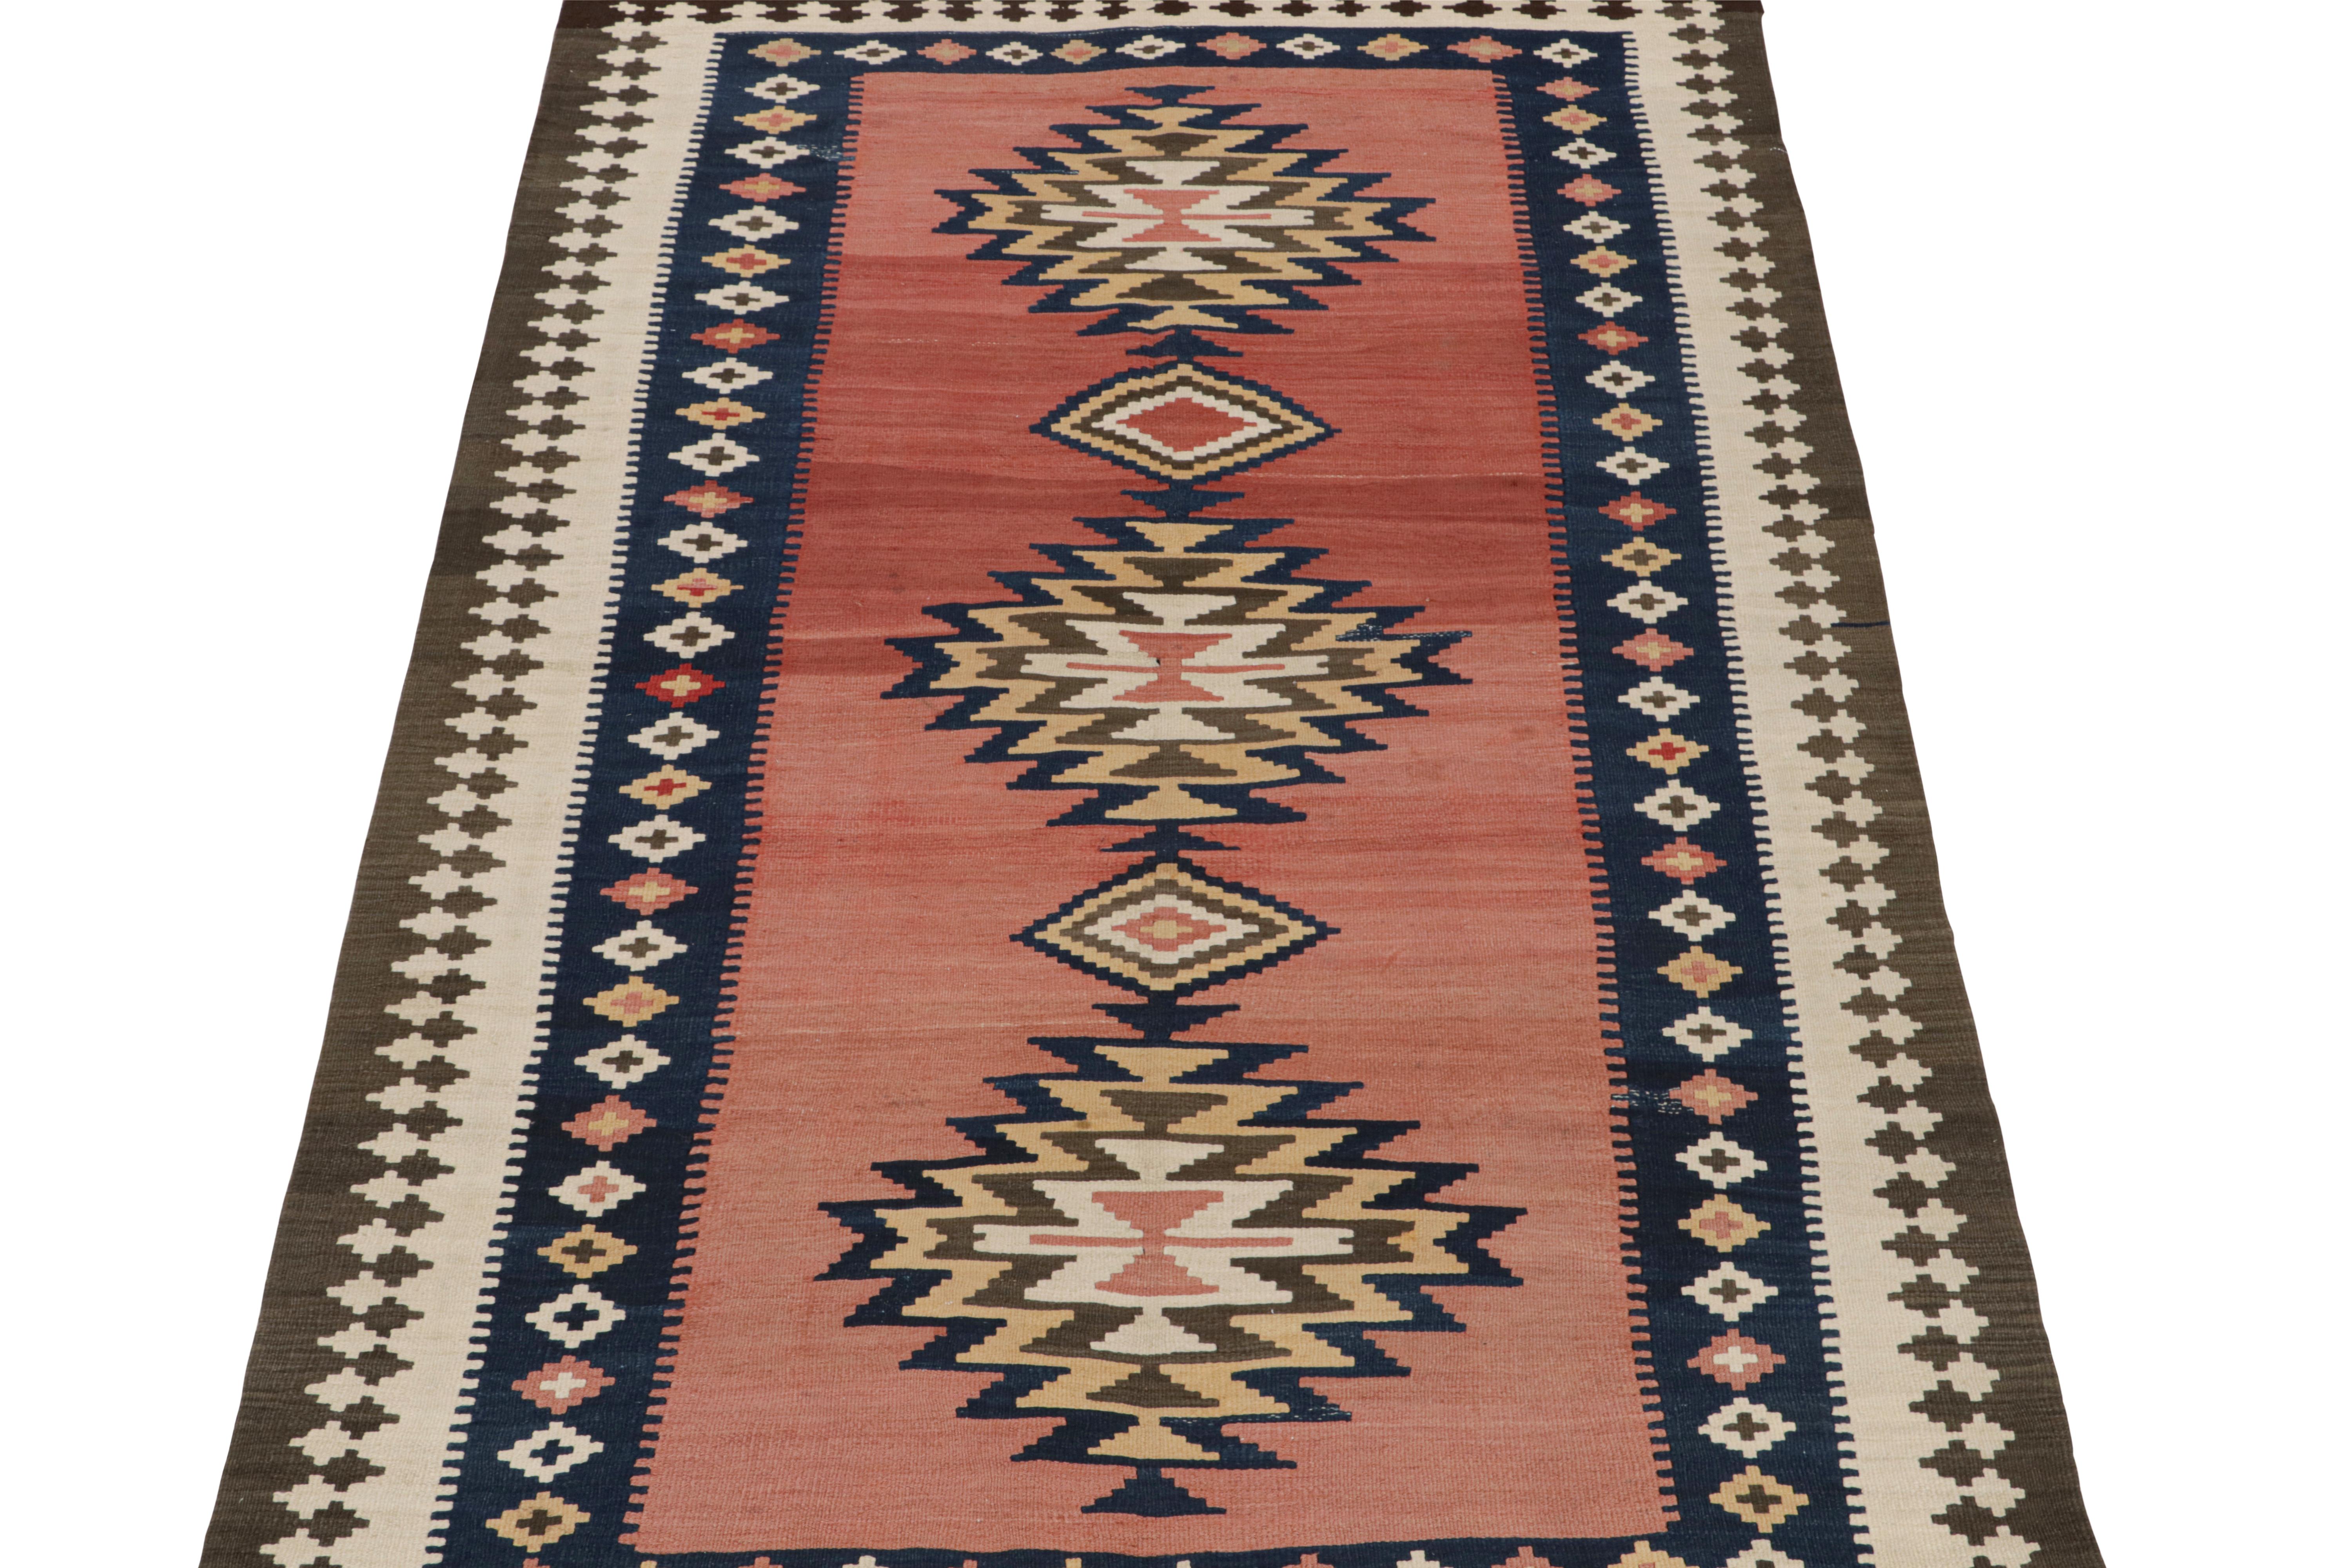 Tribal Vintage Shahsavan Persian Kilim in Red with Medallion Patterns by Rug & Kilim For Sale